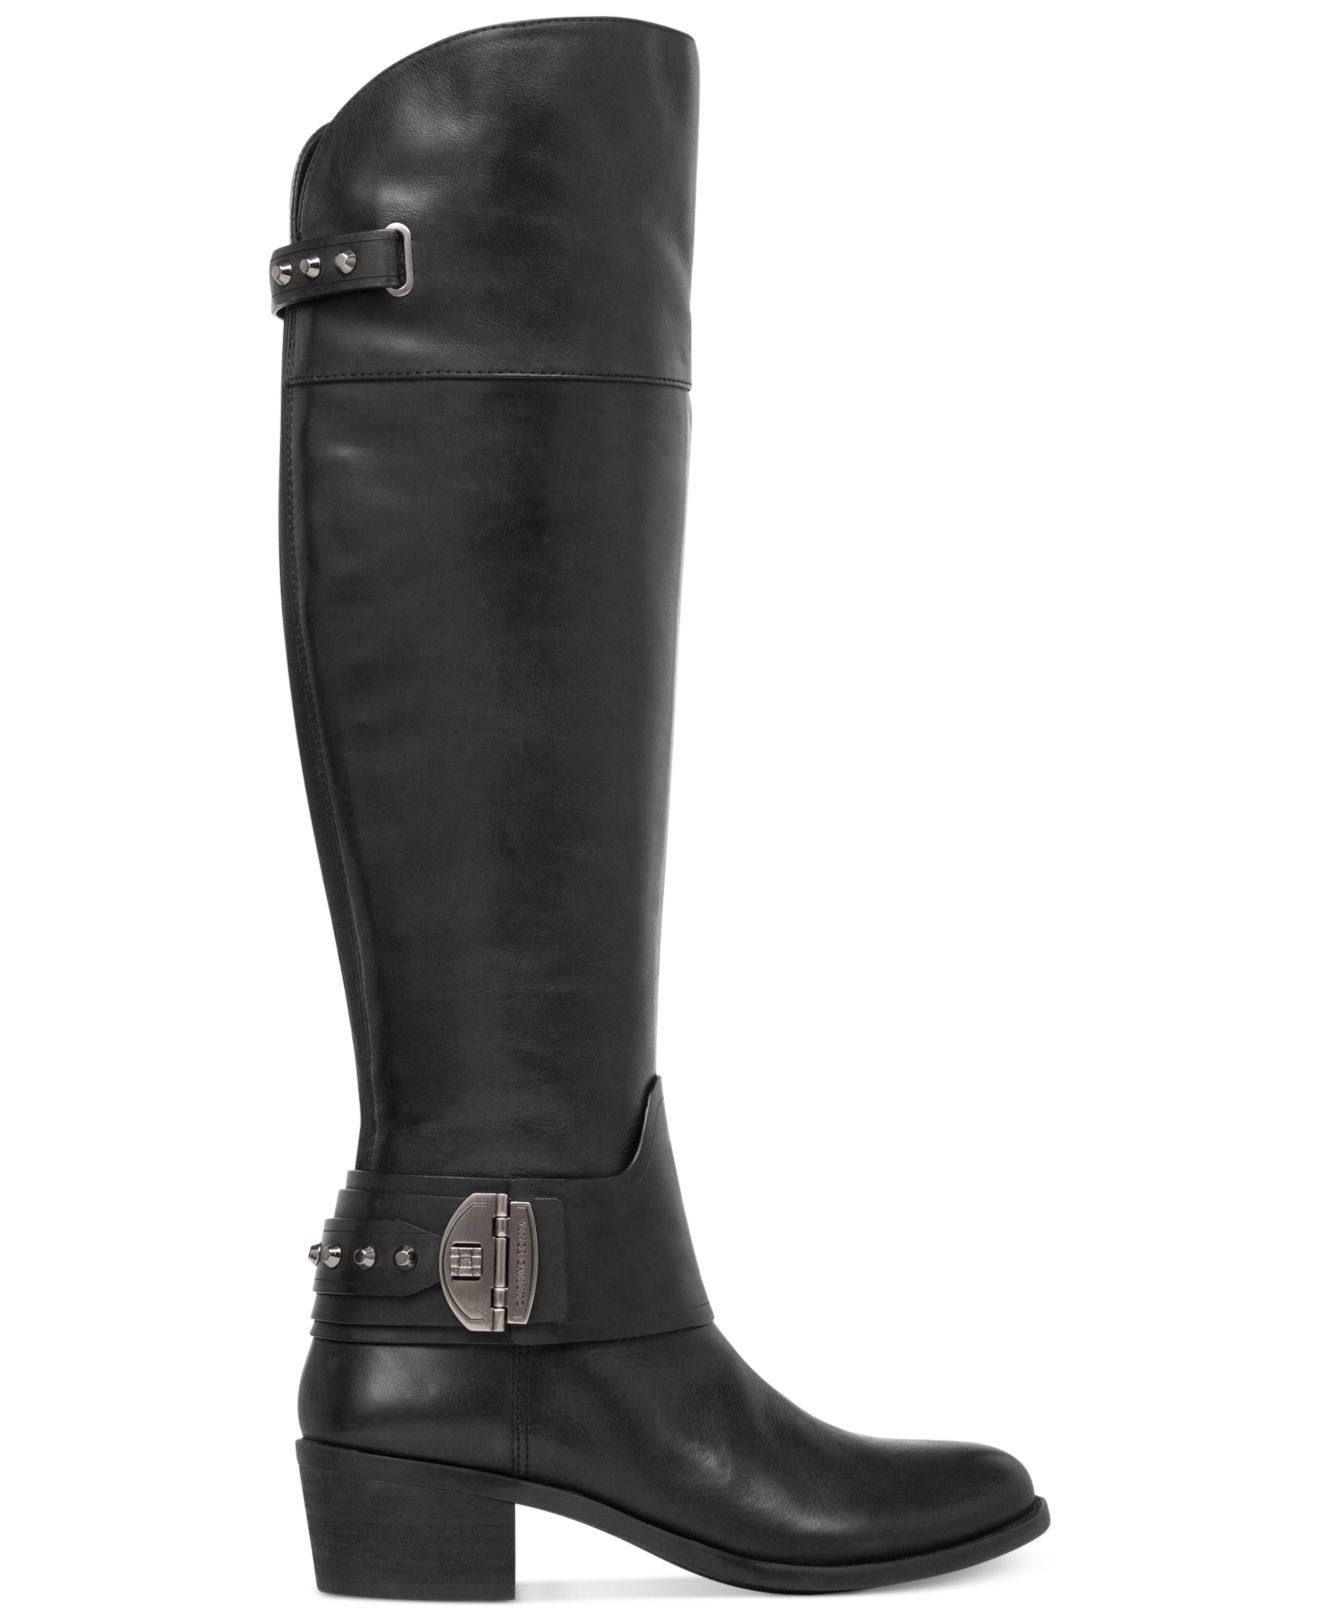 Lyst - Vince Camuto Beatrix Over-The-Knee Wide Calf Riding Boots in Black